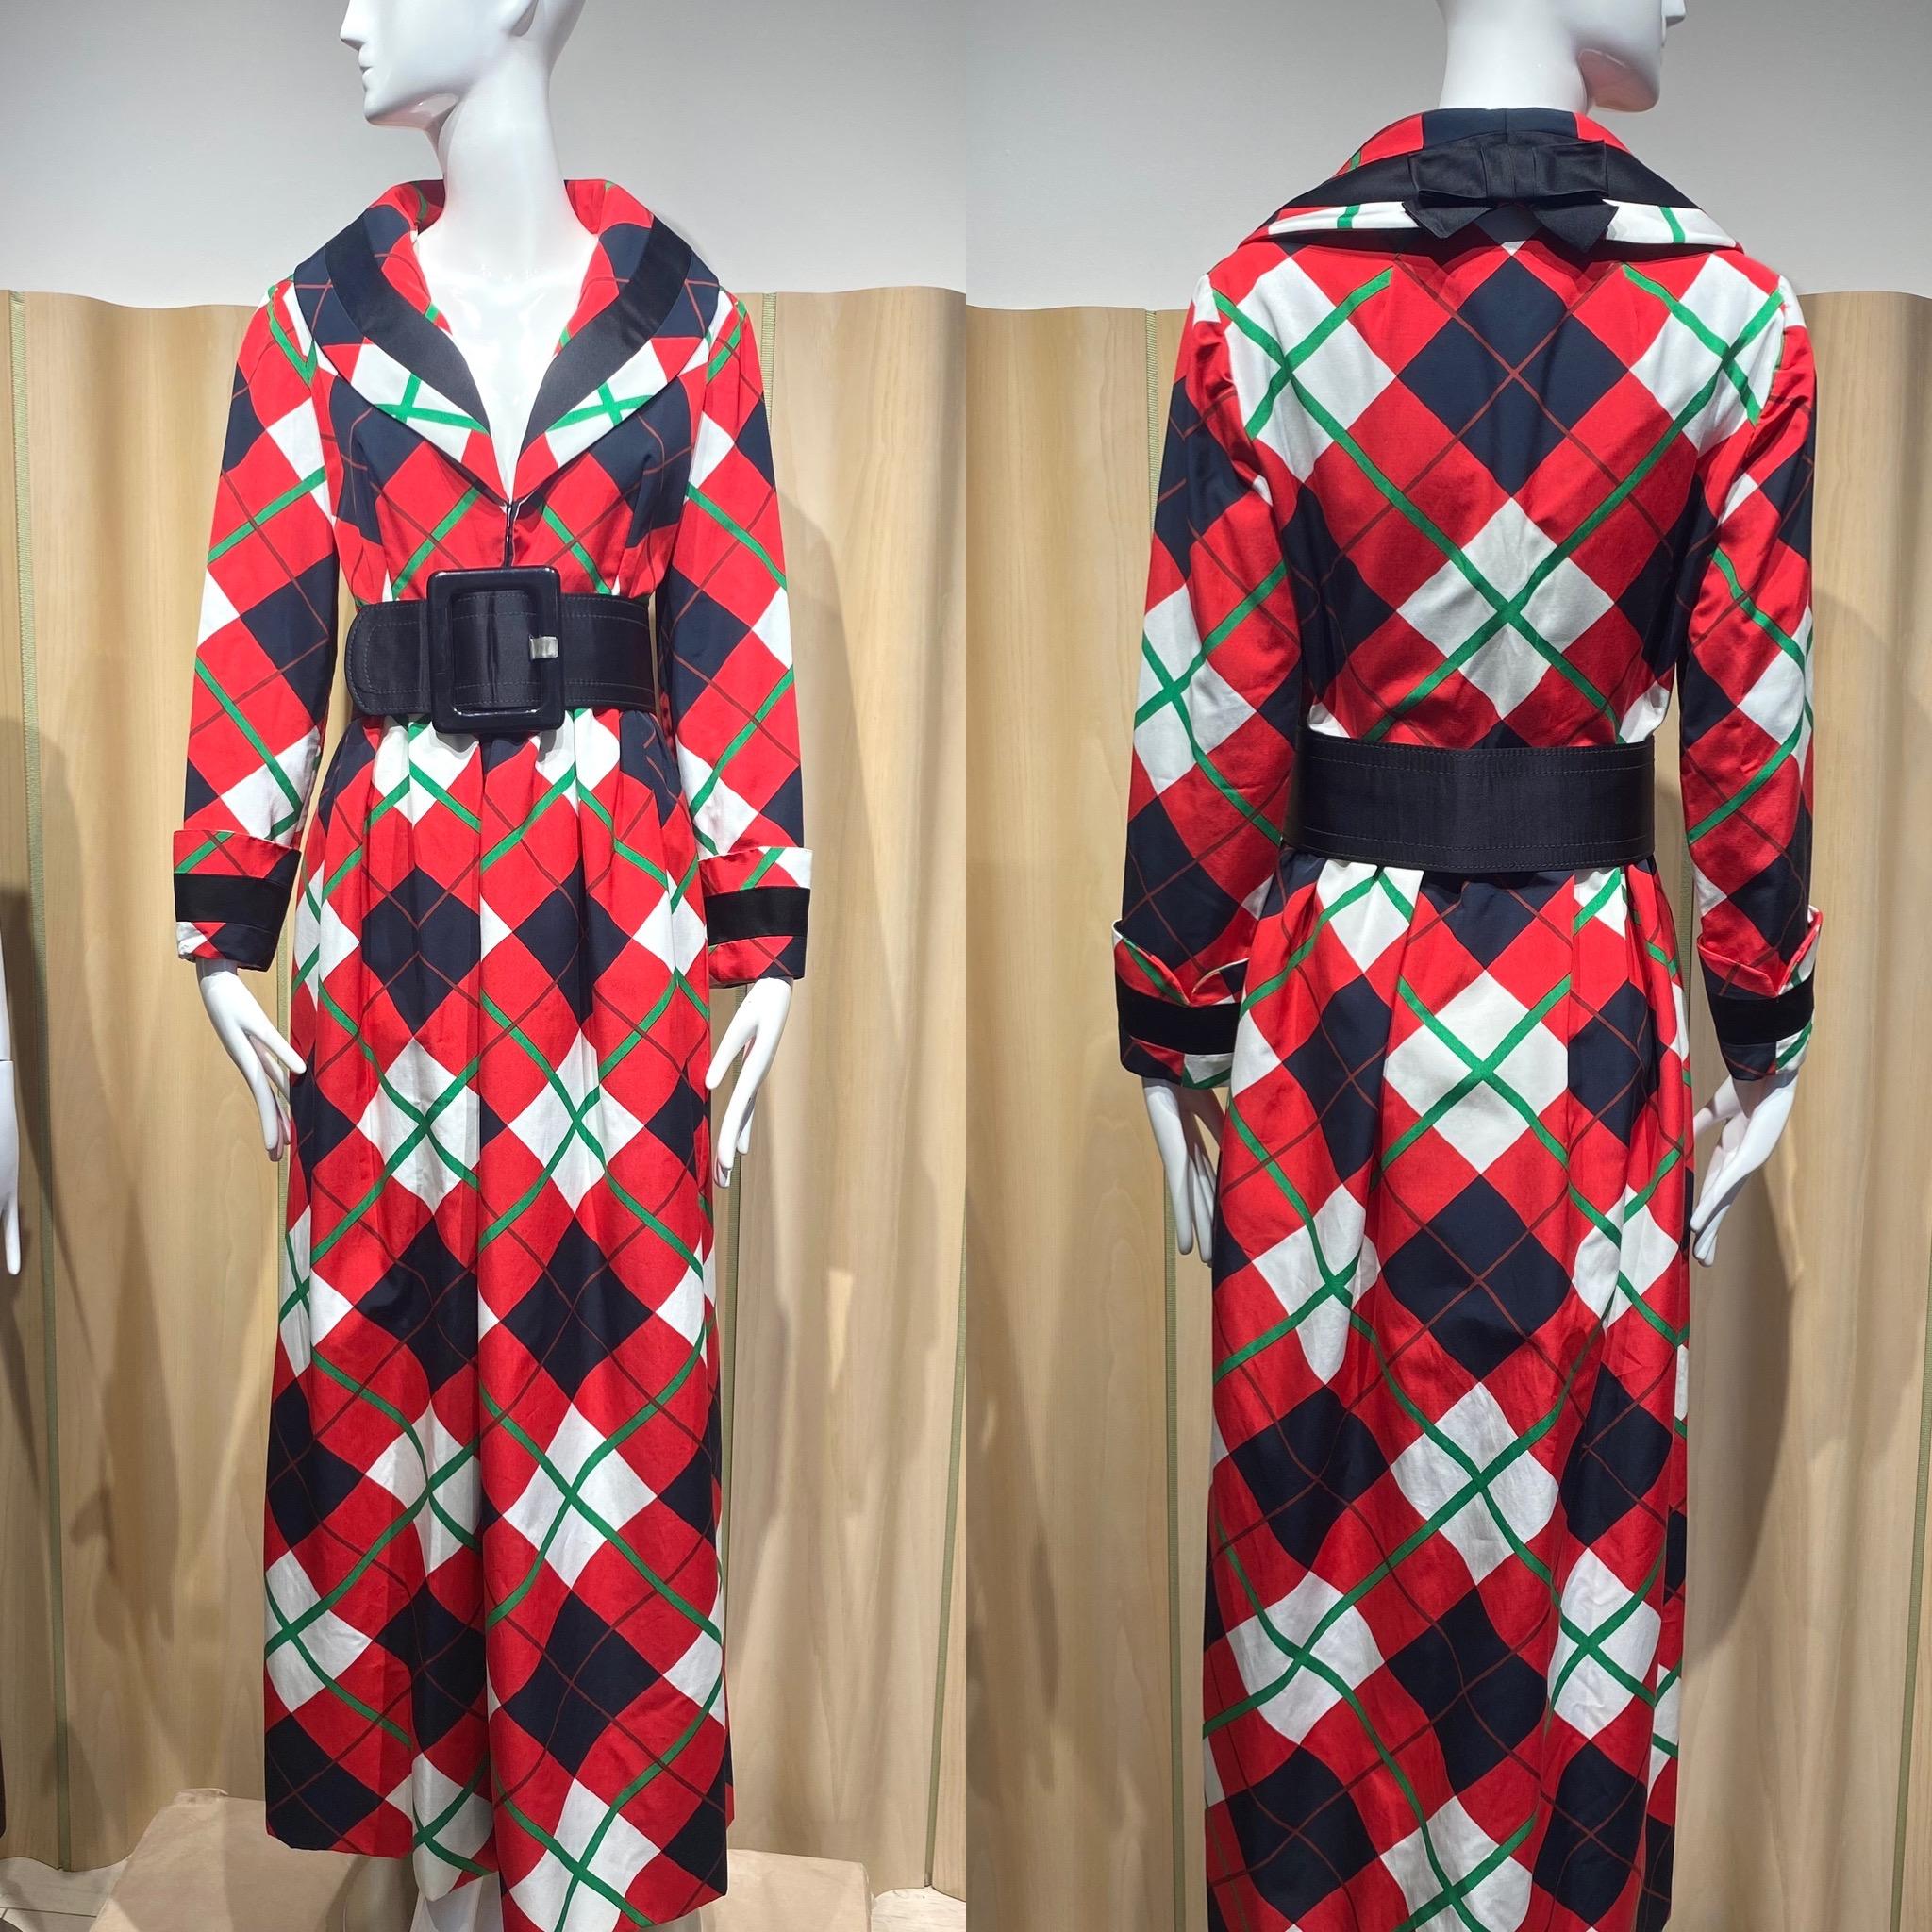 1970s Geoffrey Beene Plaid maxi long sleeve dress with beautiful collar and large belt. 
color : red, black, green and white
paten leather belt
pockets
bow
Size Medium
Measurement :
Bust: 39 inches / Waist 30 inches / hip 60 inches
